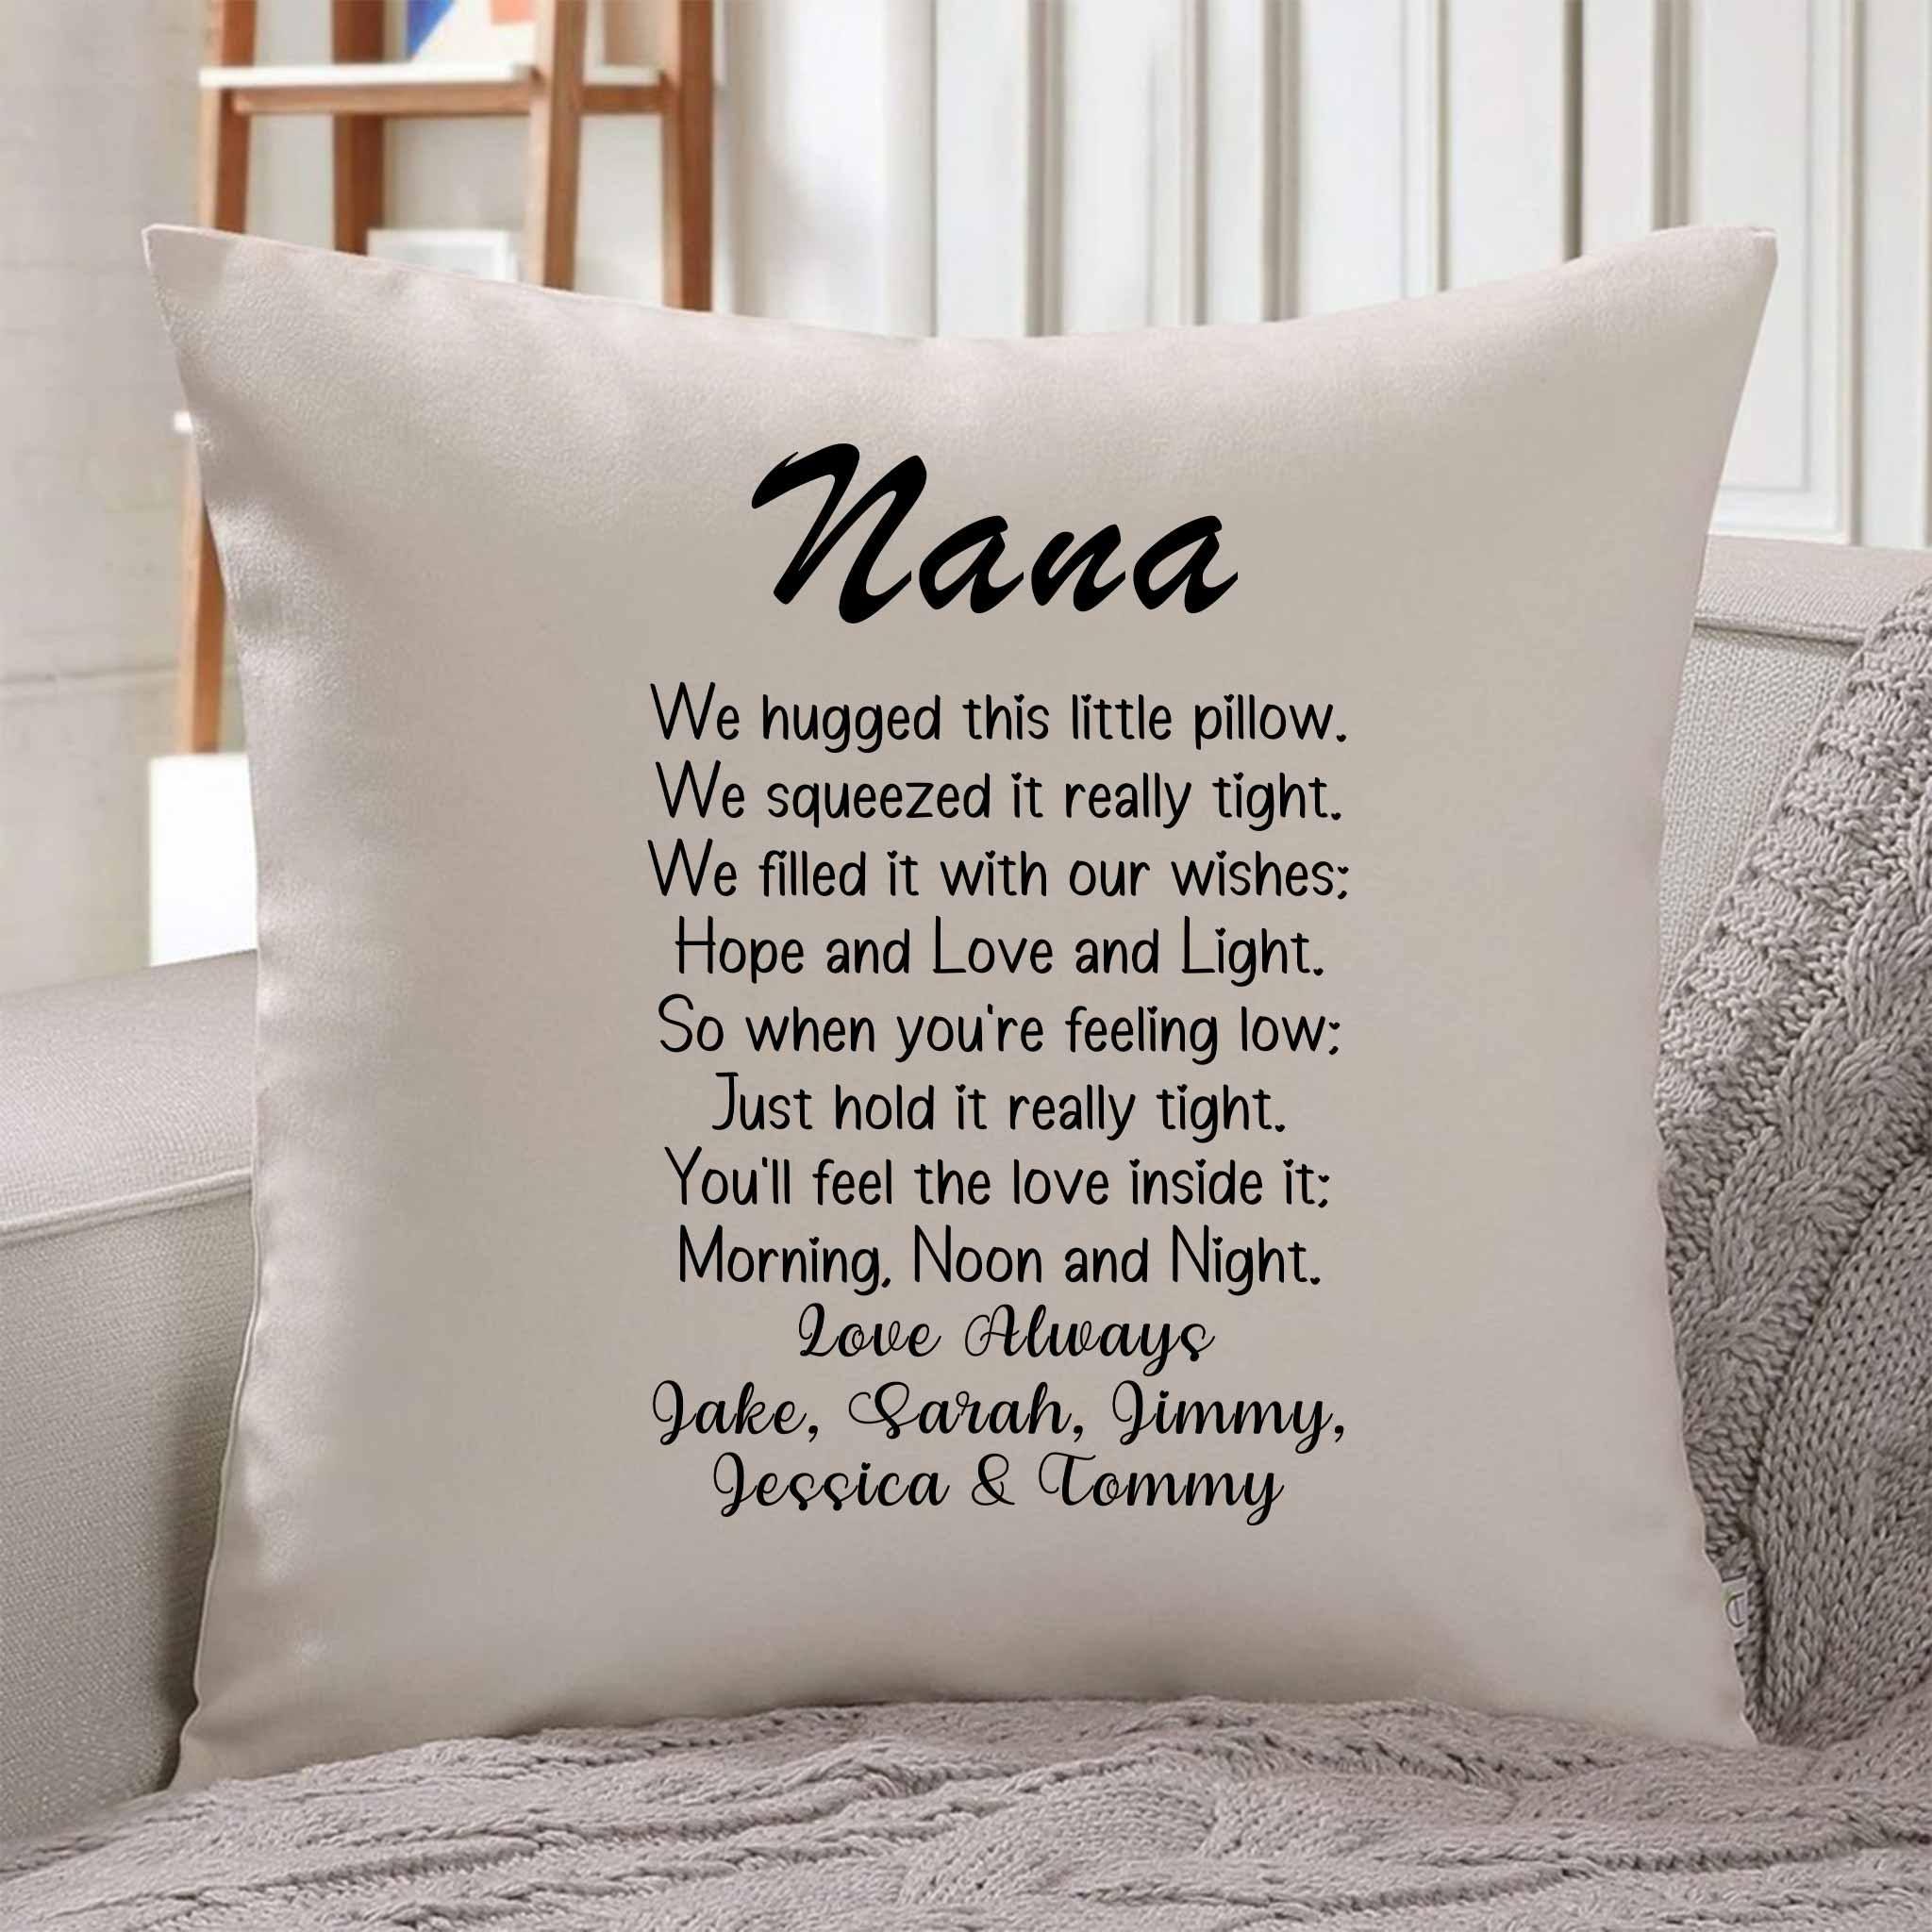 Buy Shipra Cotton Personalized Red Heart Pillow With Photo And Text For  Birthday, Valentines Day, Wedding Anniversary, Rakhi And All Occasions Gifts,  Pack of 1 Online at Low Prices in India -